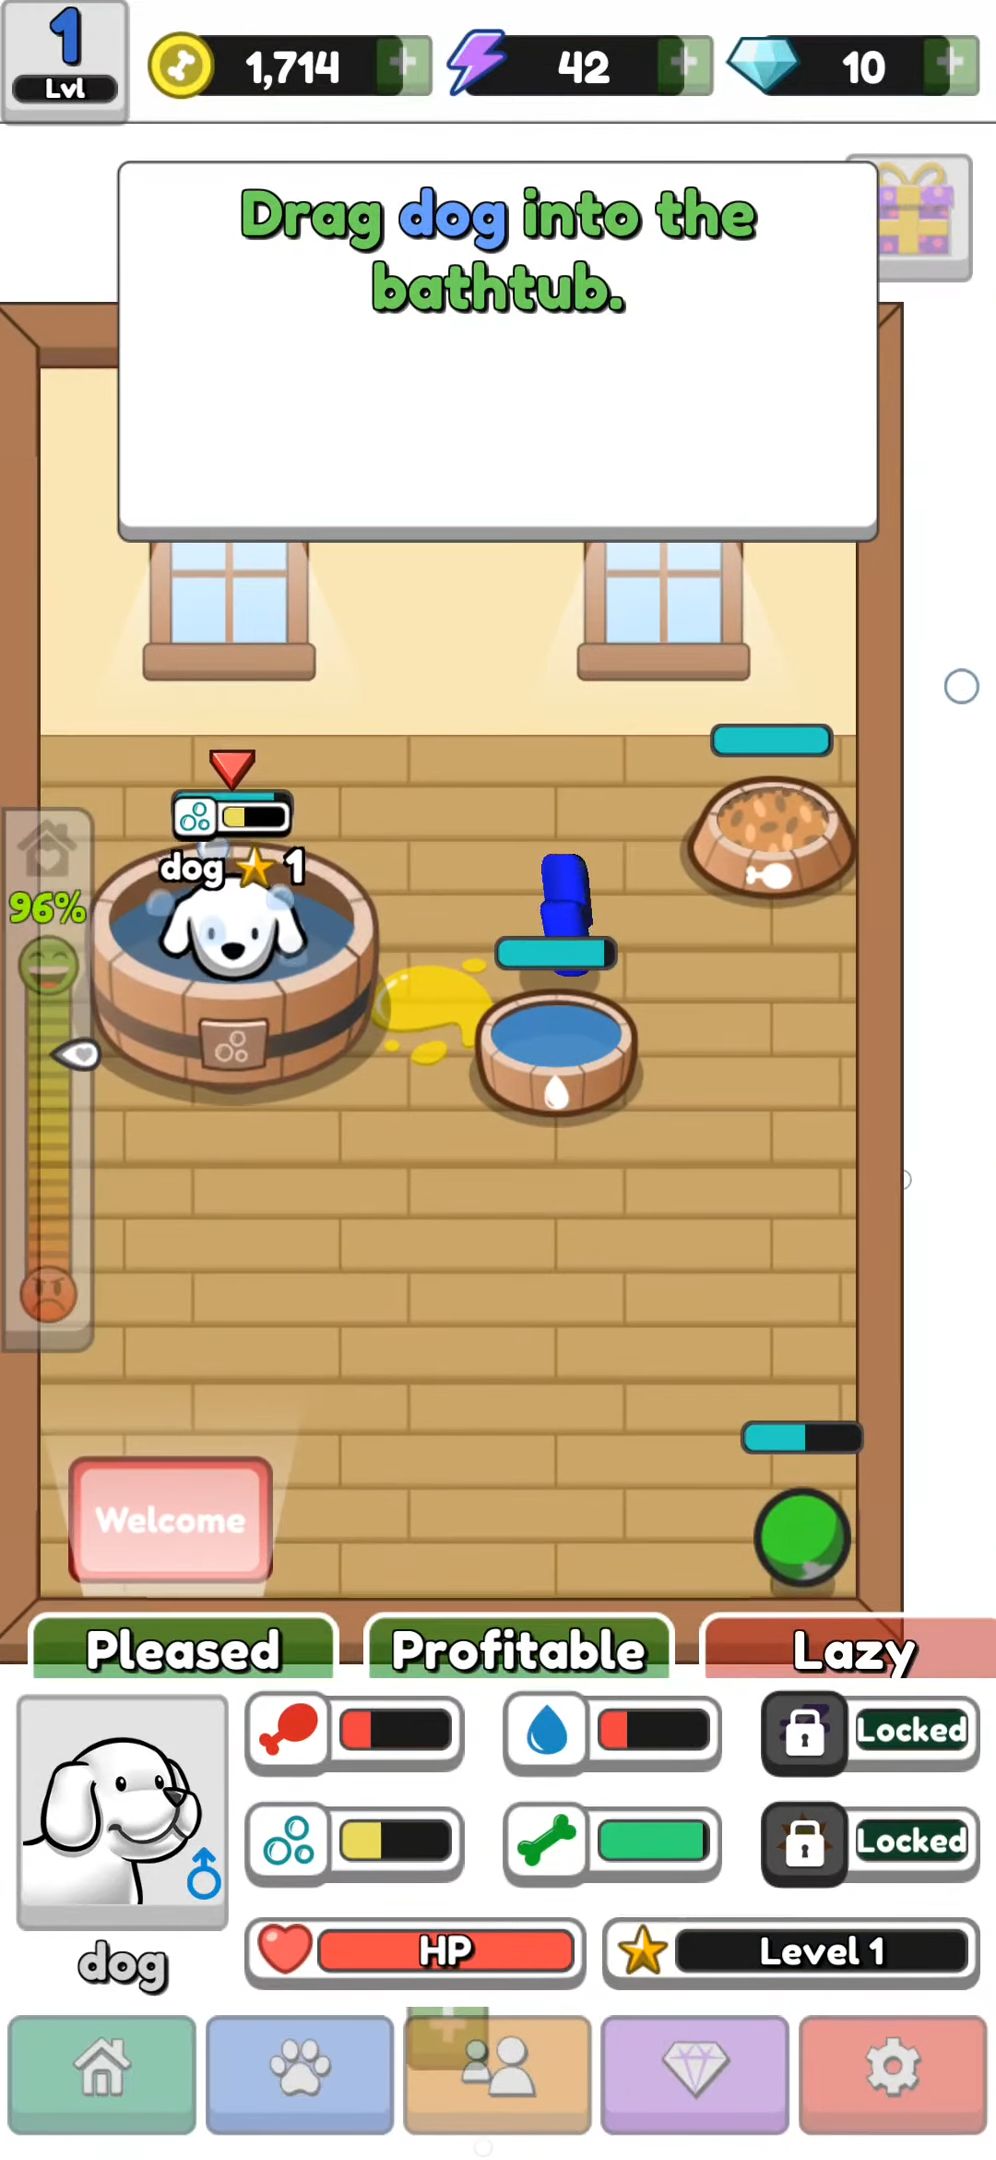 Pet Idle - Android game screenshots.